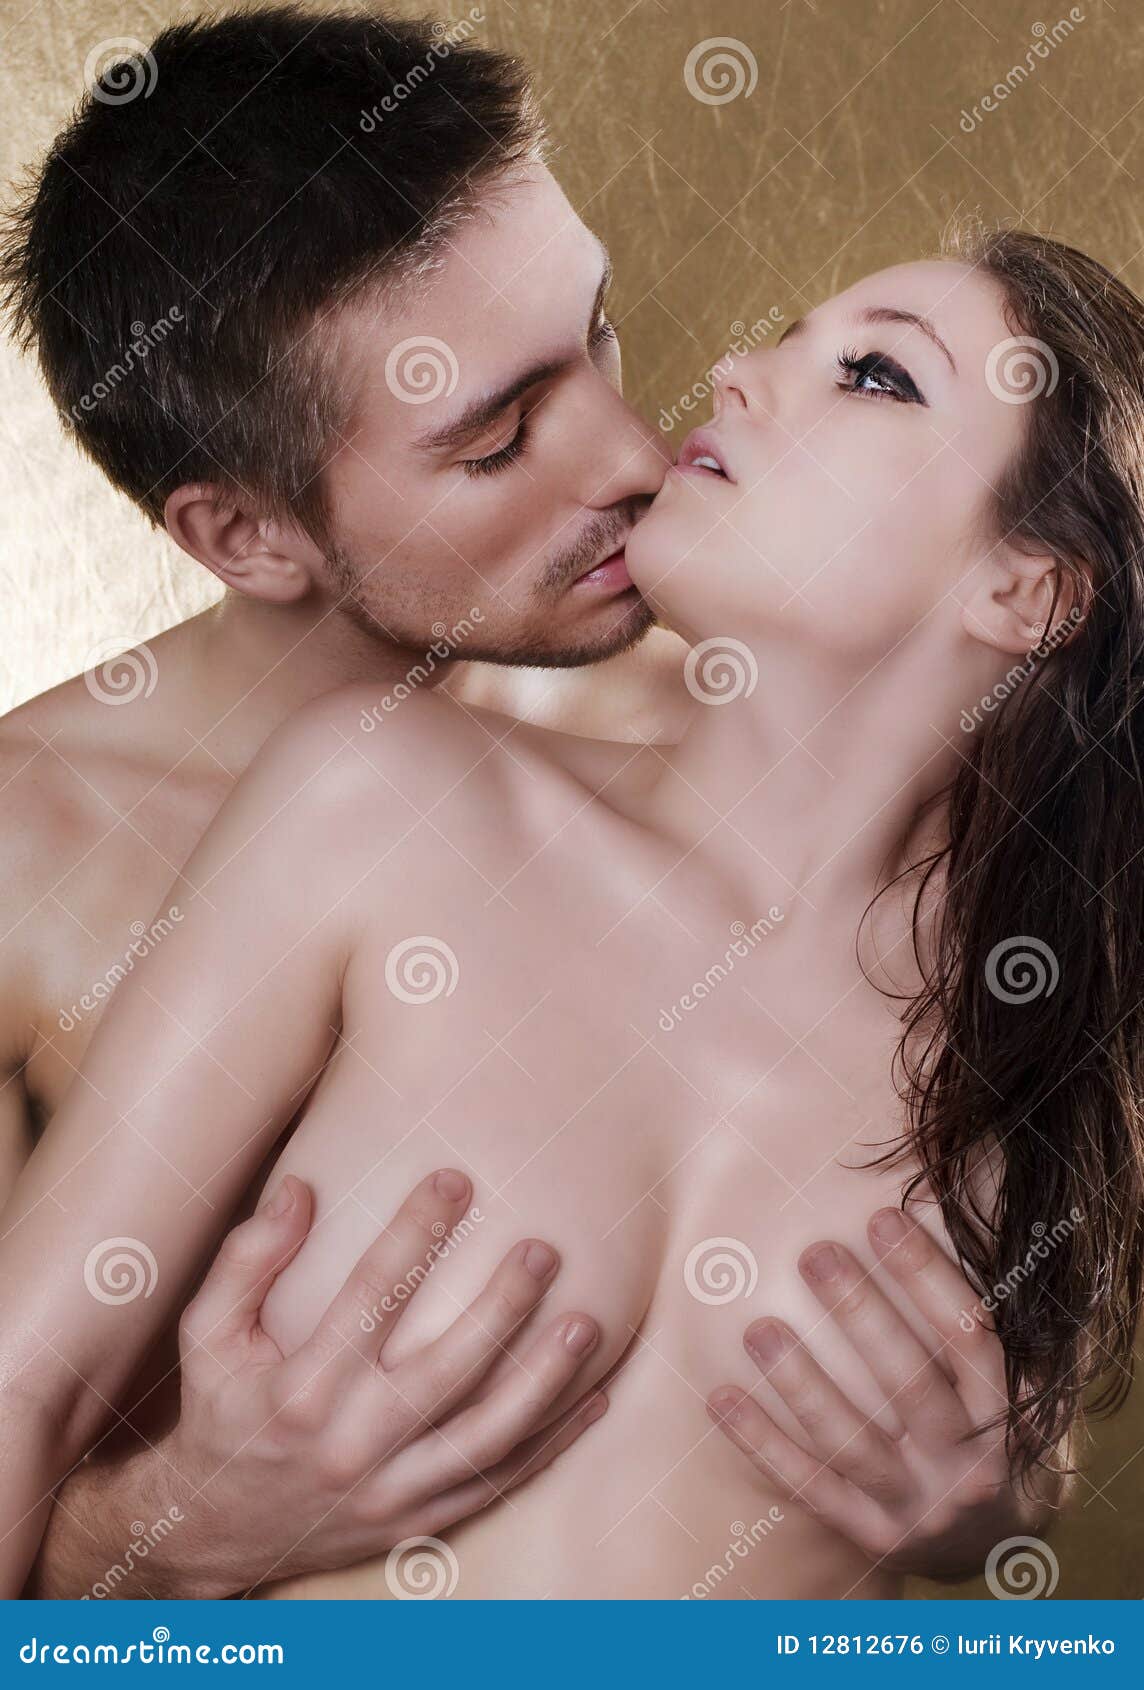 Naked people kissing